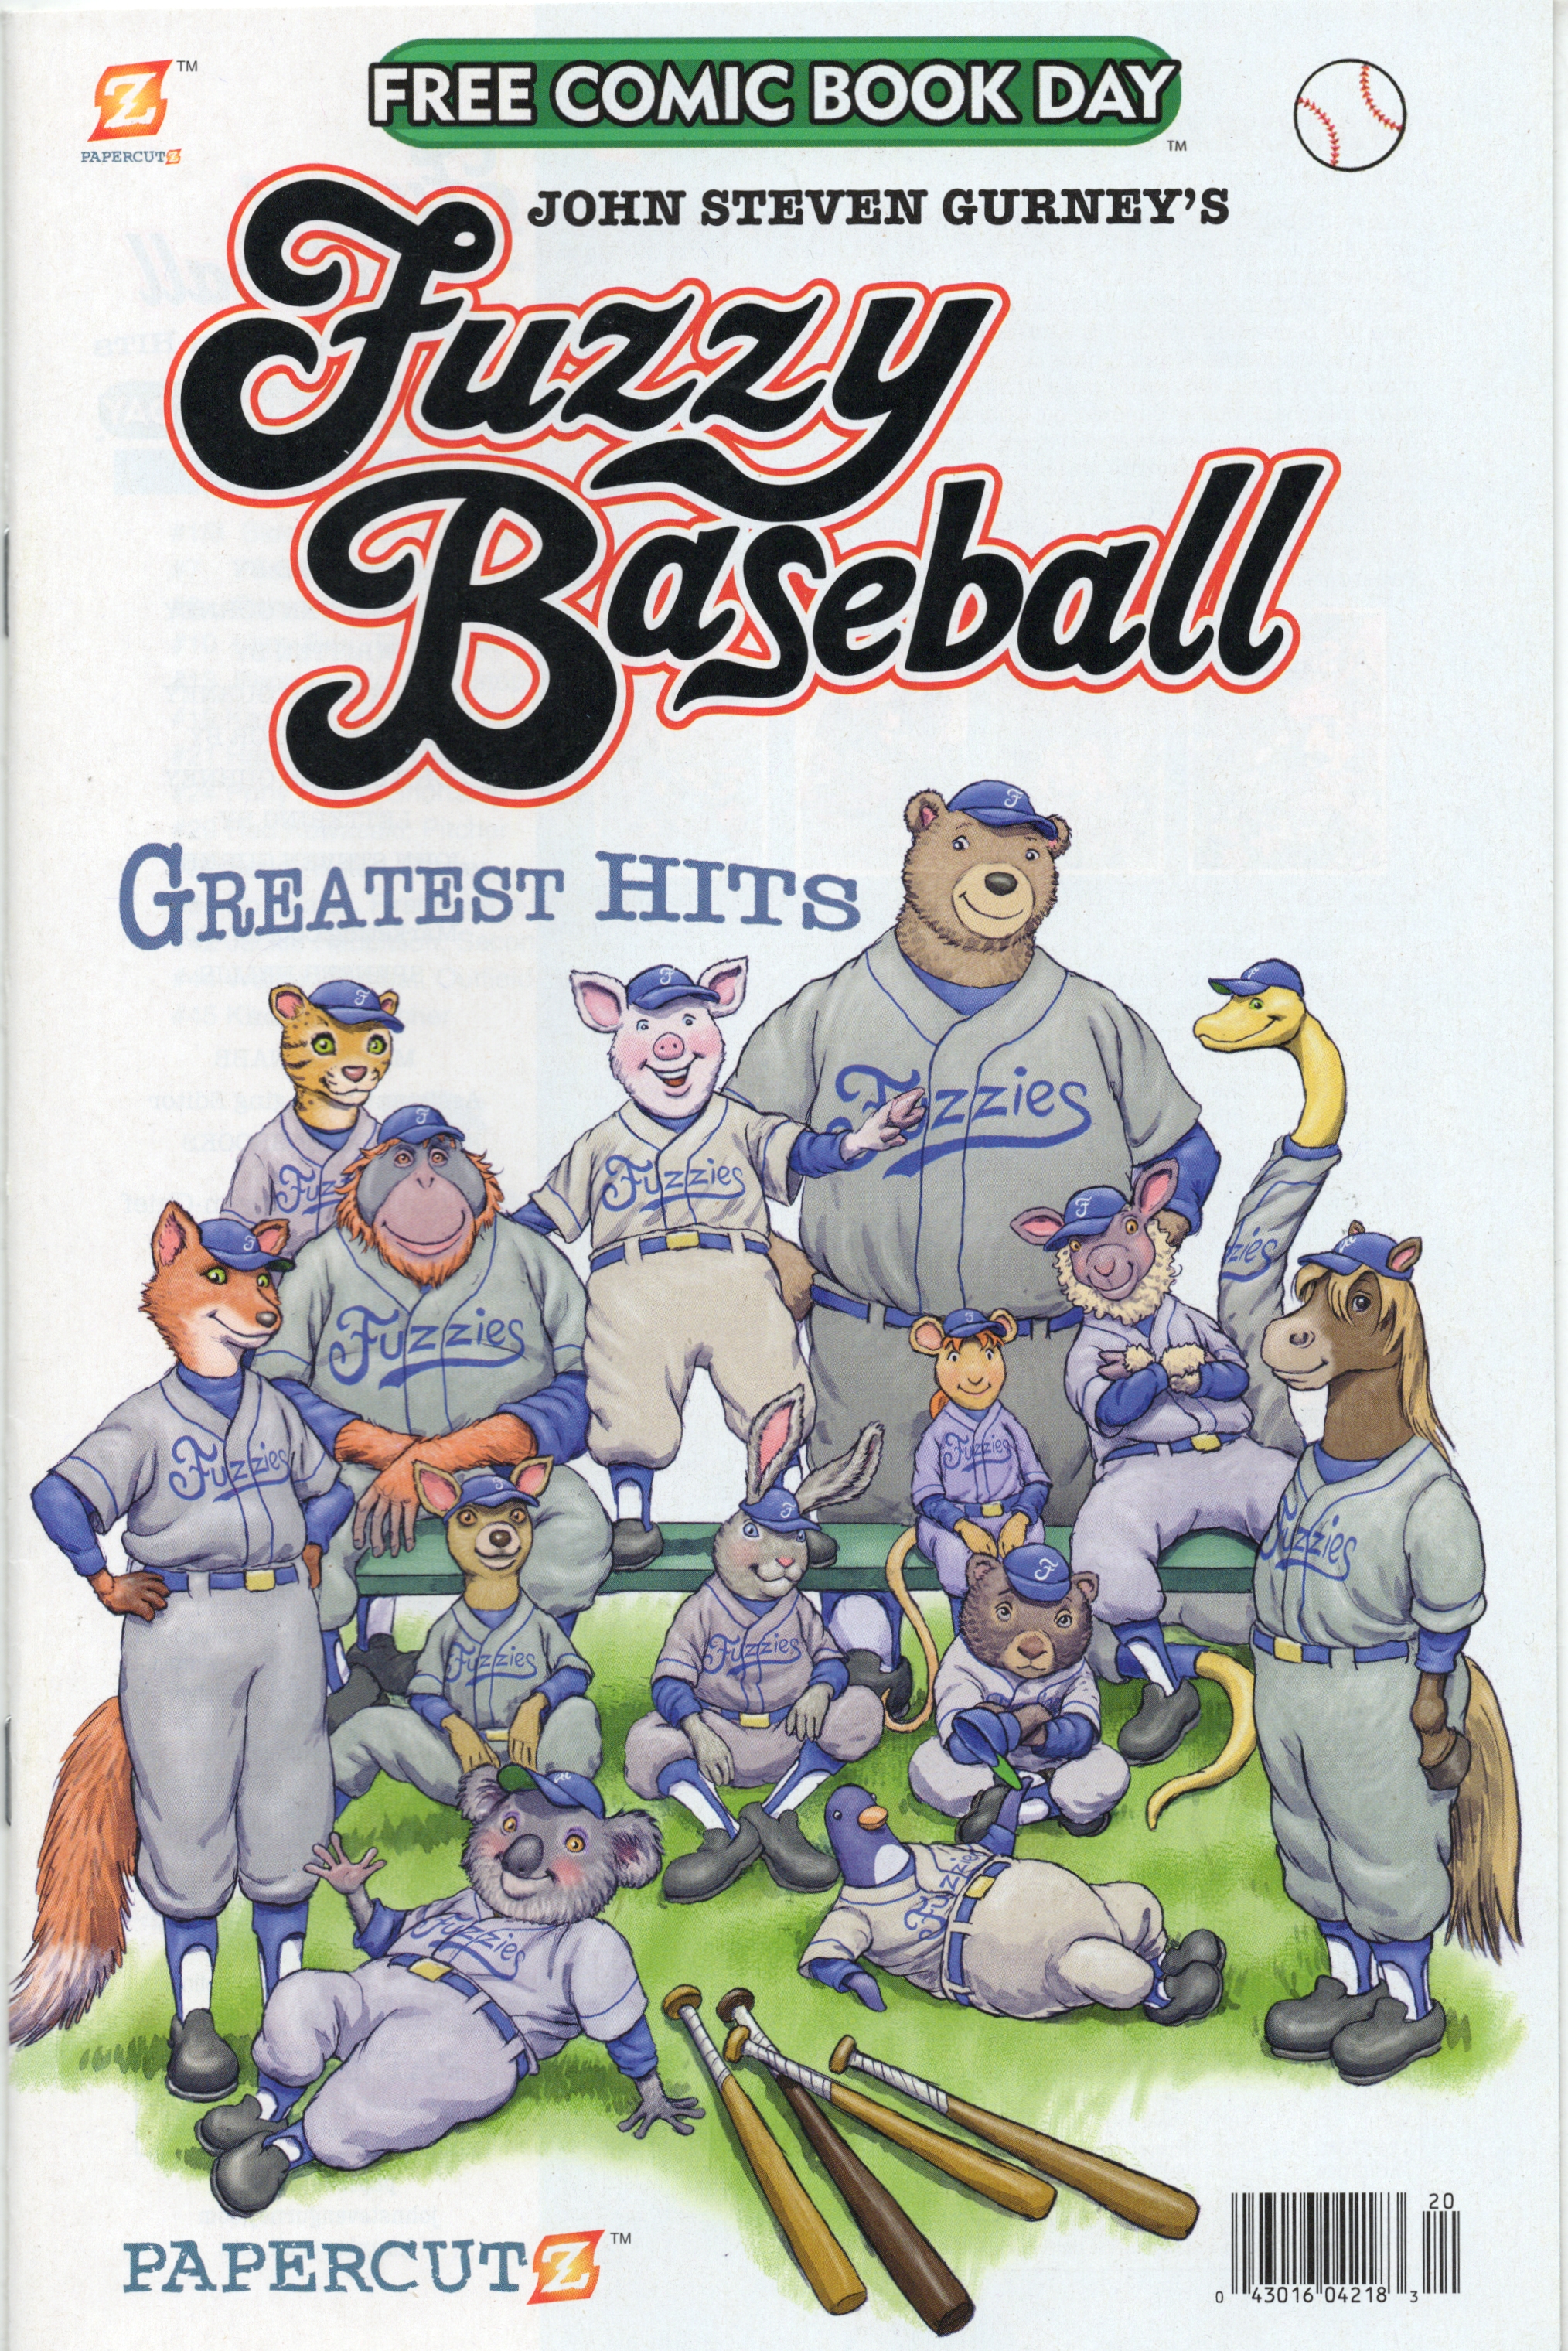 Read online Free Comic Book Day 2022 comic -  Issue # Papercutz Fuzzy Baseball - 1